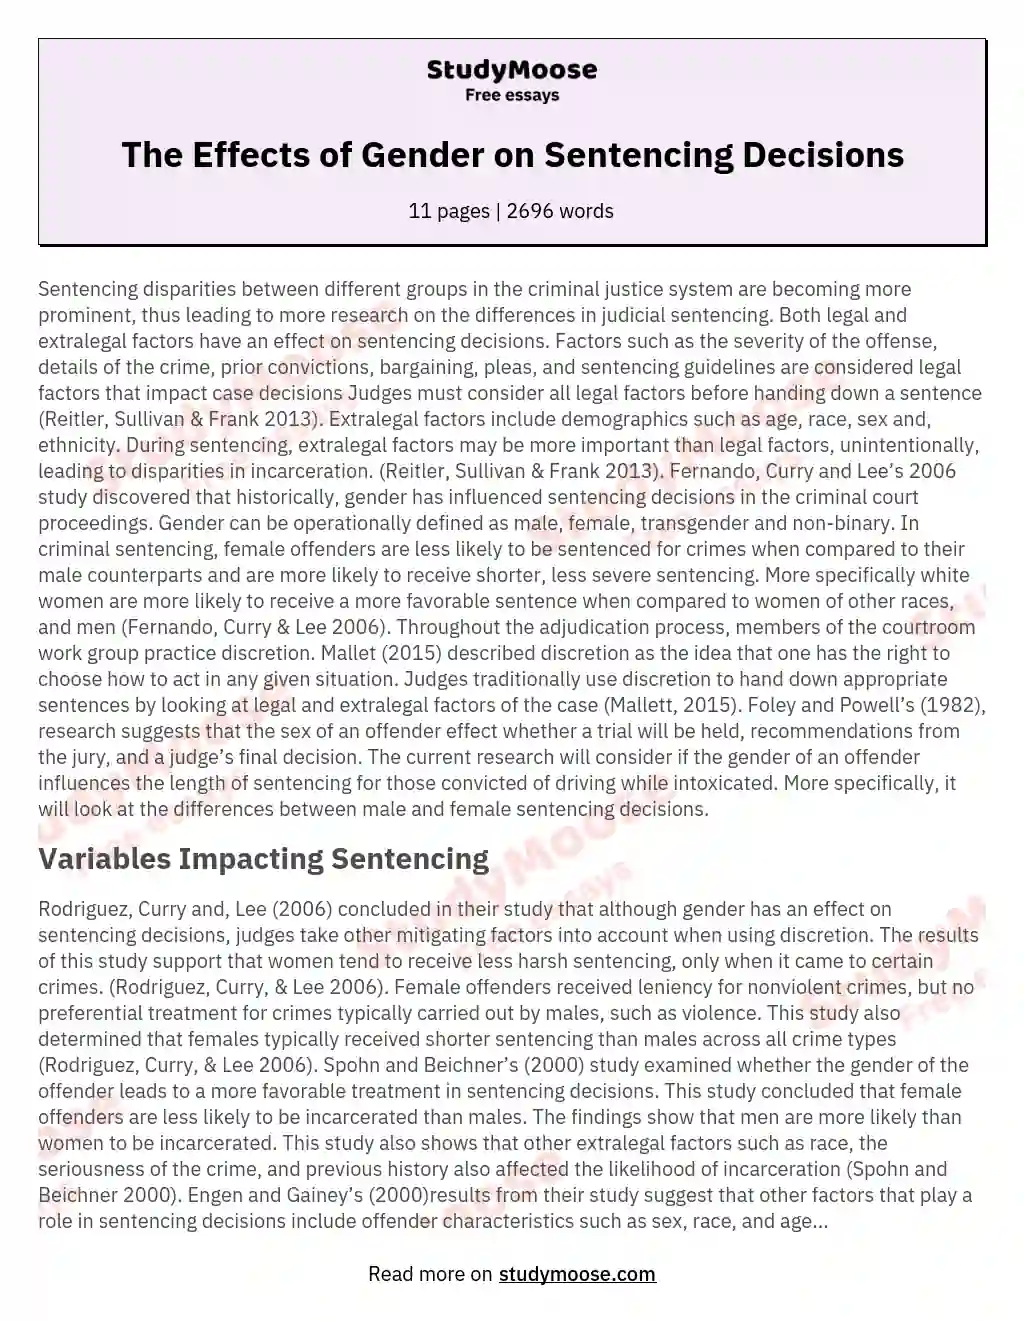 The Effects of Gender on Sentencing Decisions essay